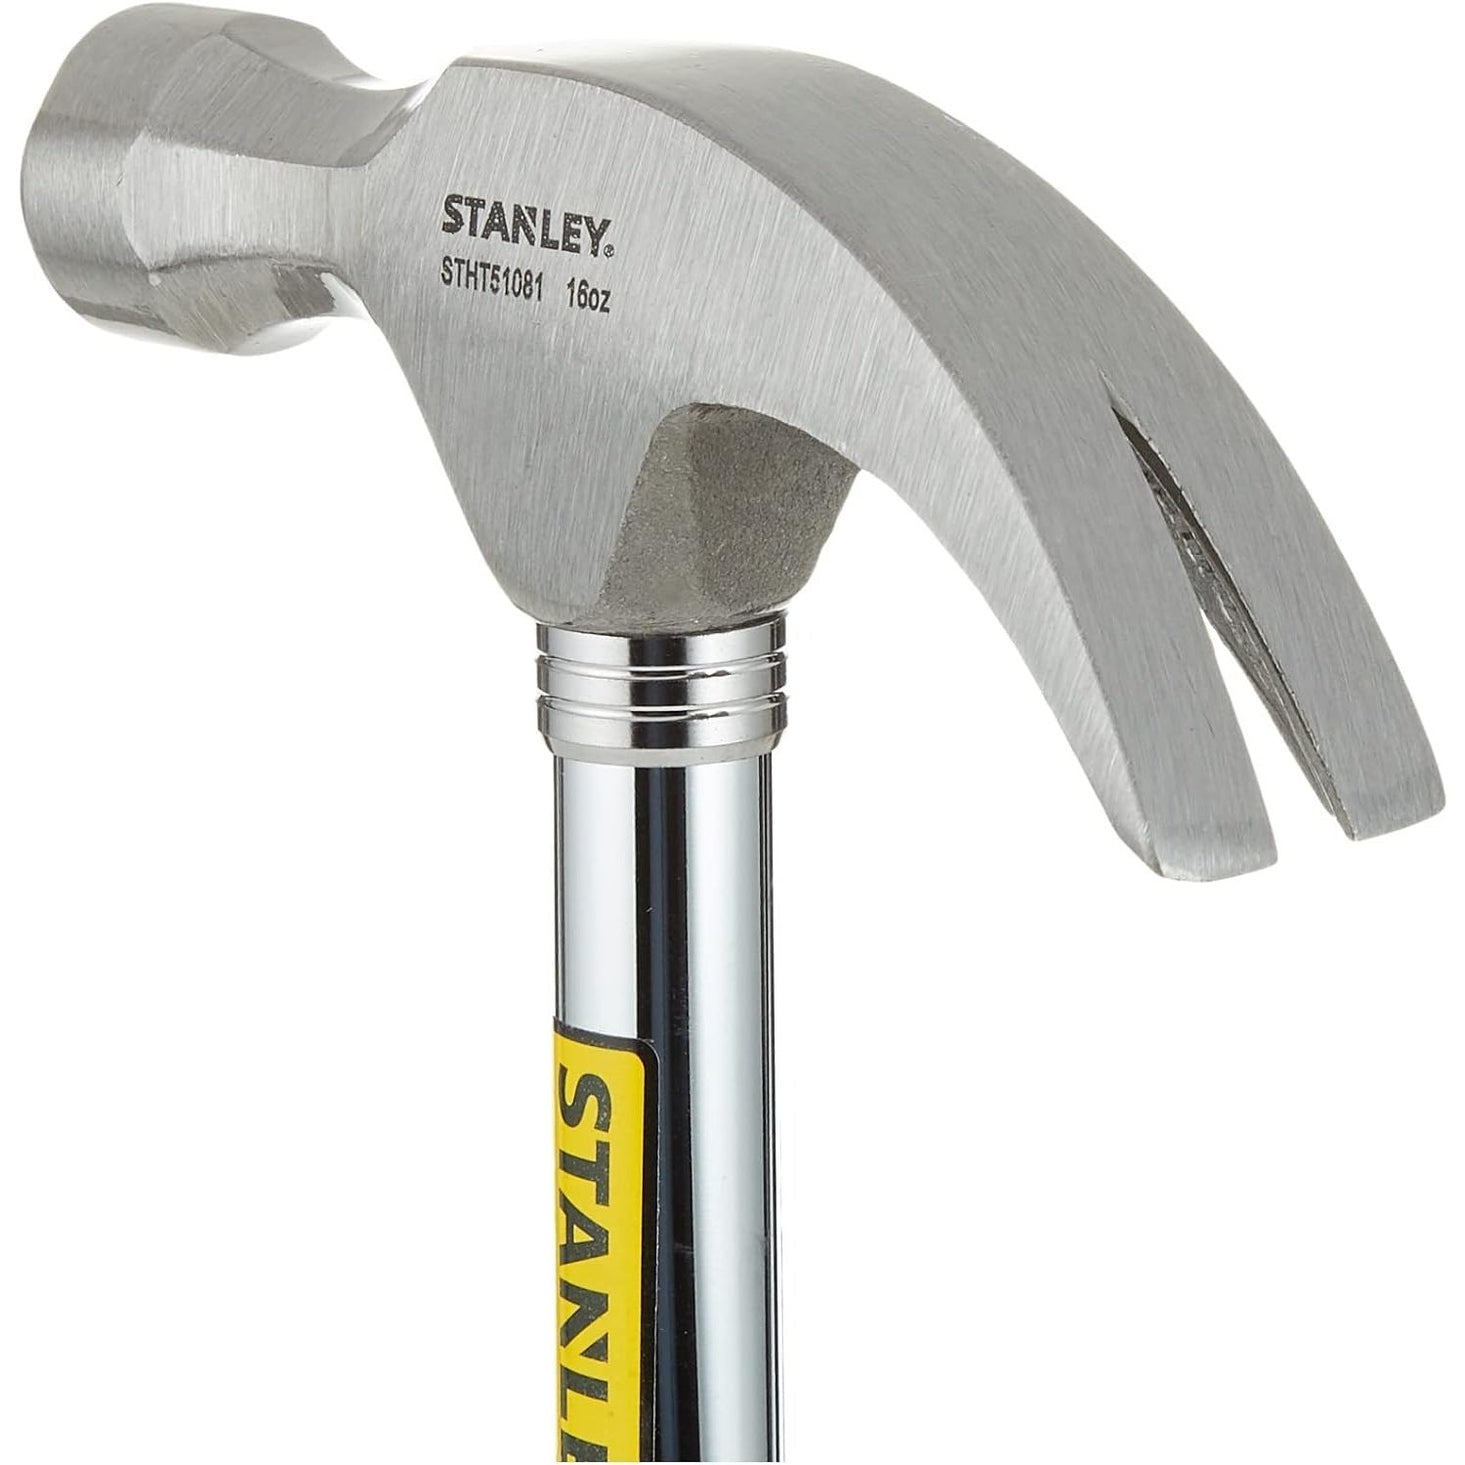 Stanley Claw Hammer 570g - 1-51-033 | Supply Master, Accra, Ghana Hammers Mallets & Sledges Buy Tools hardware Building materials